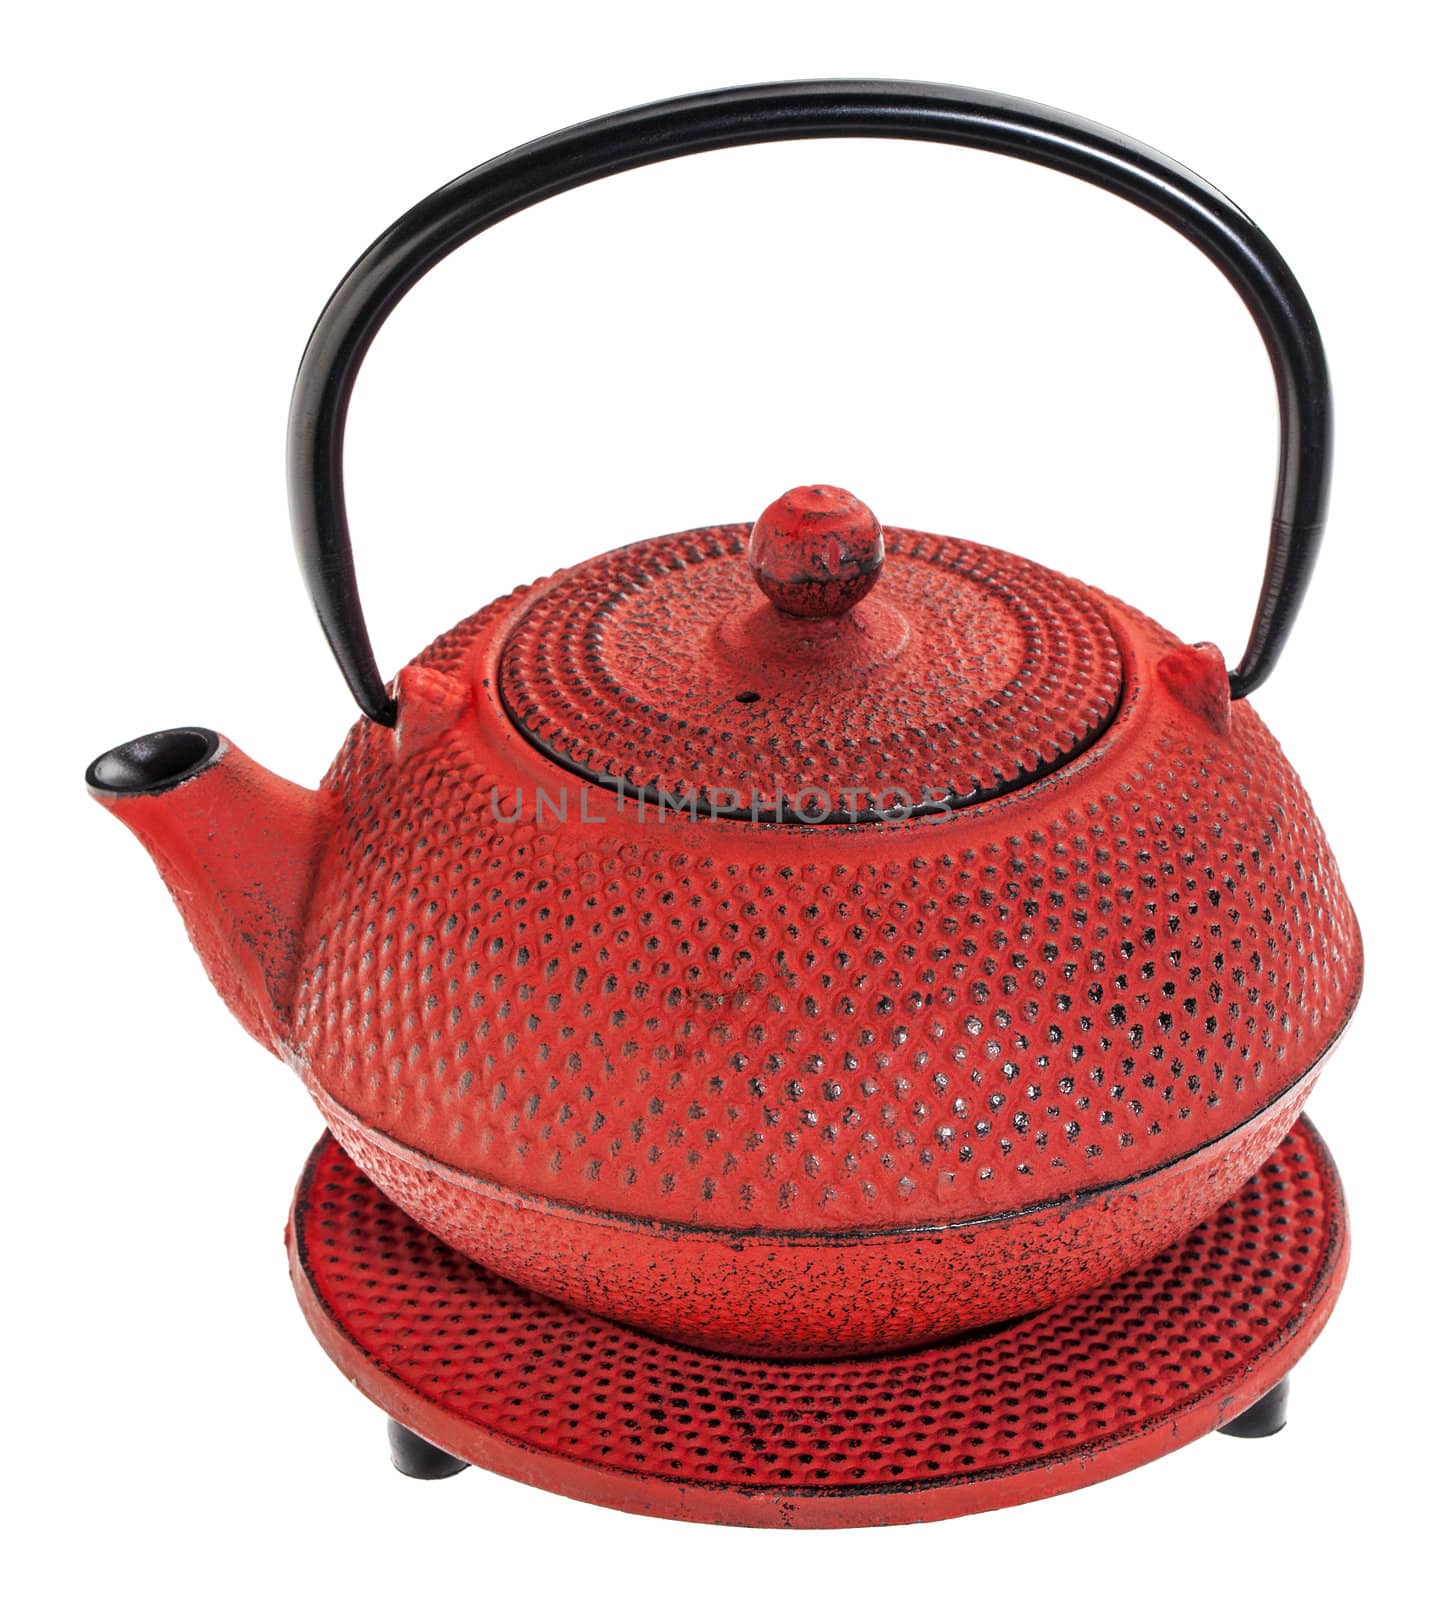 red hobnail tetsubin - cast iron traditional Japanese tea pot on a trivet, isolated on white